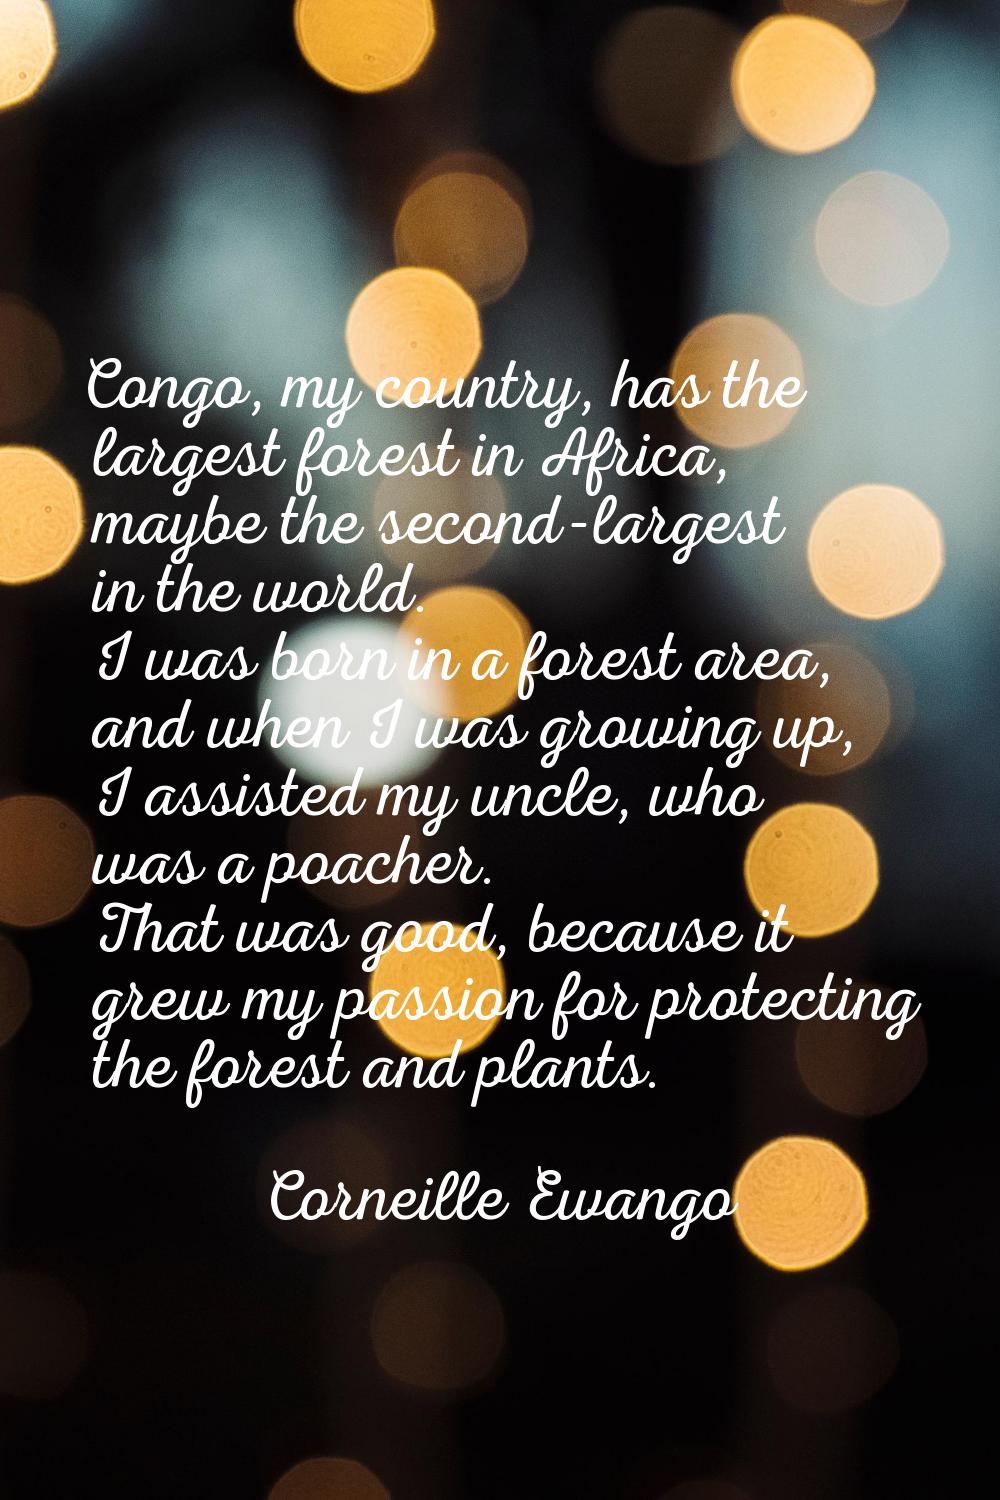 Congo, my country, has the largest forest in Africa, maybe the second-largest in the world. I was b